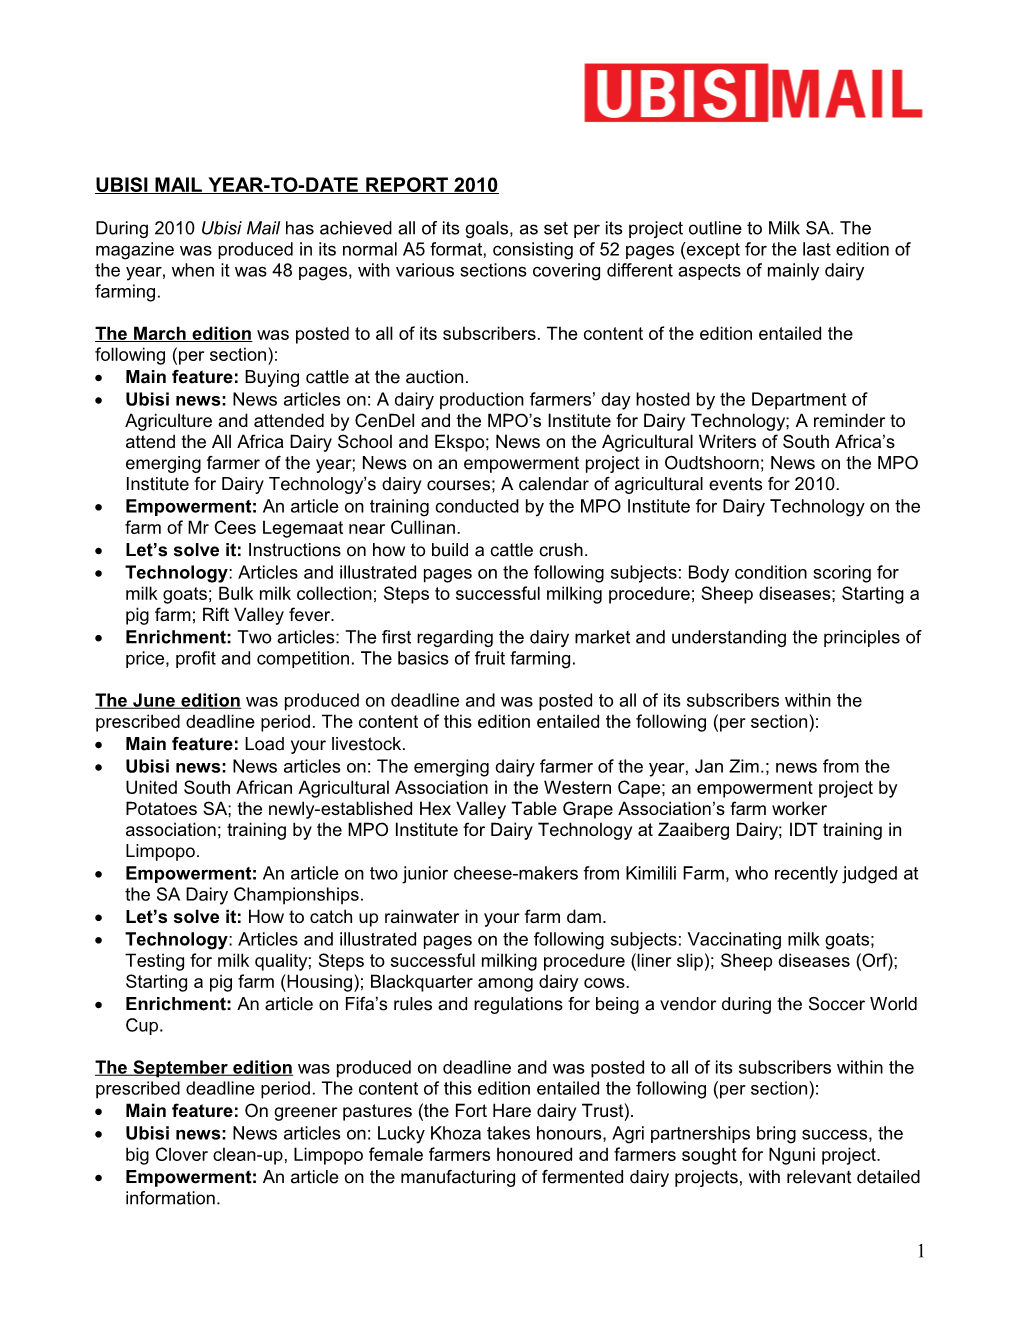 Ubisi Mail Year-To-Date Report 2010